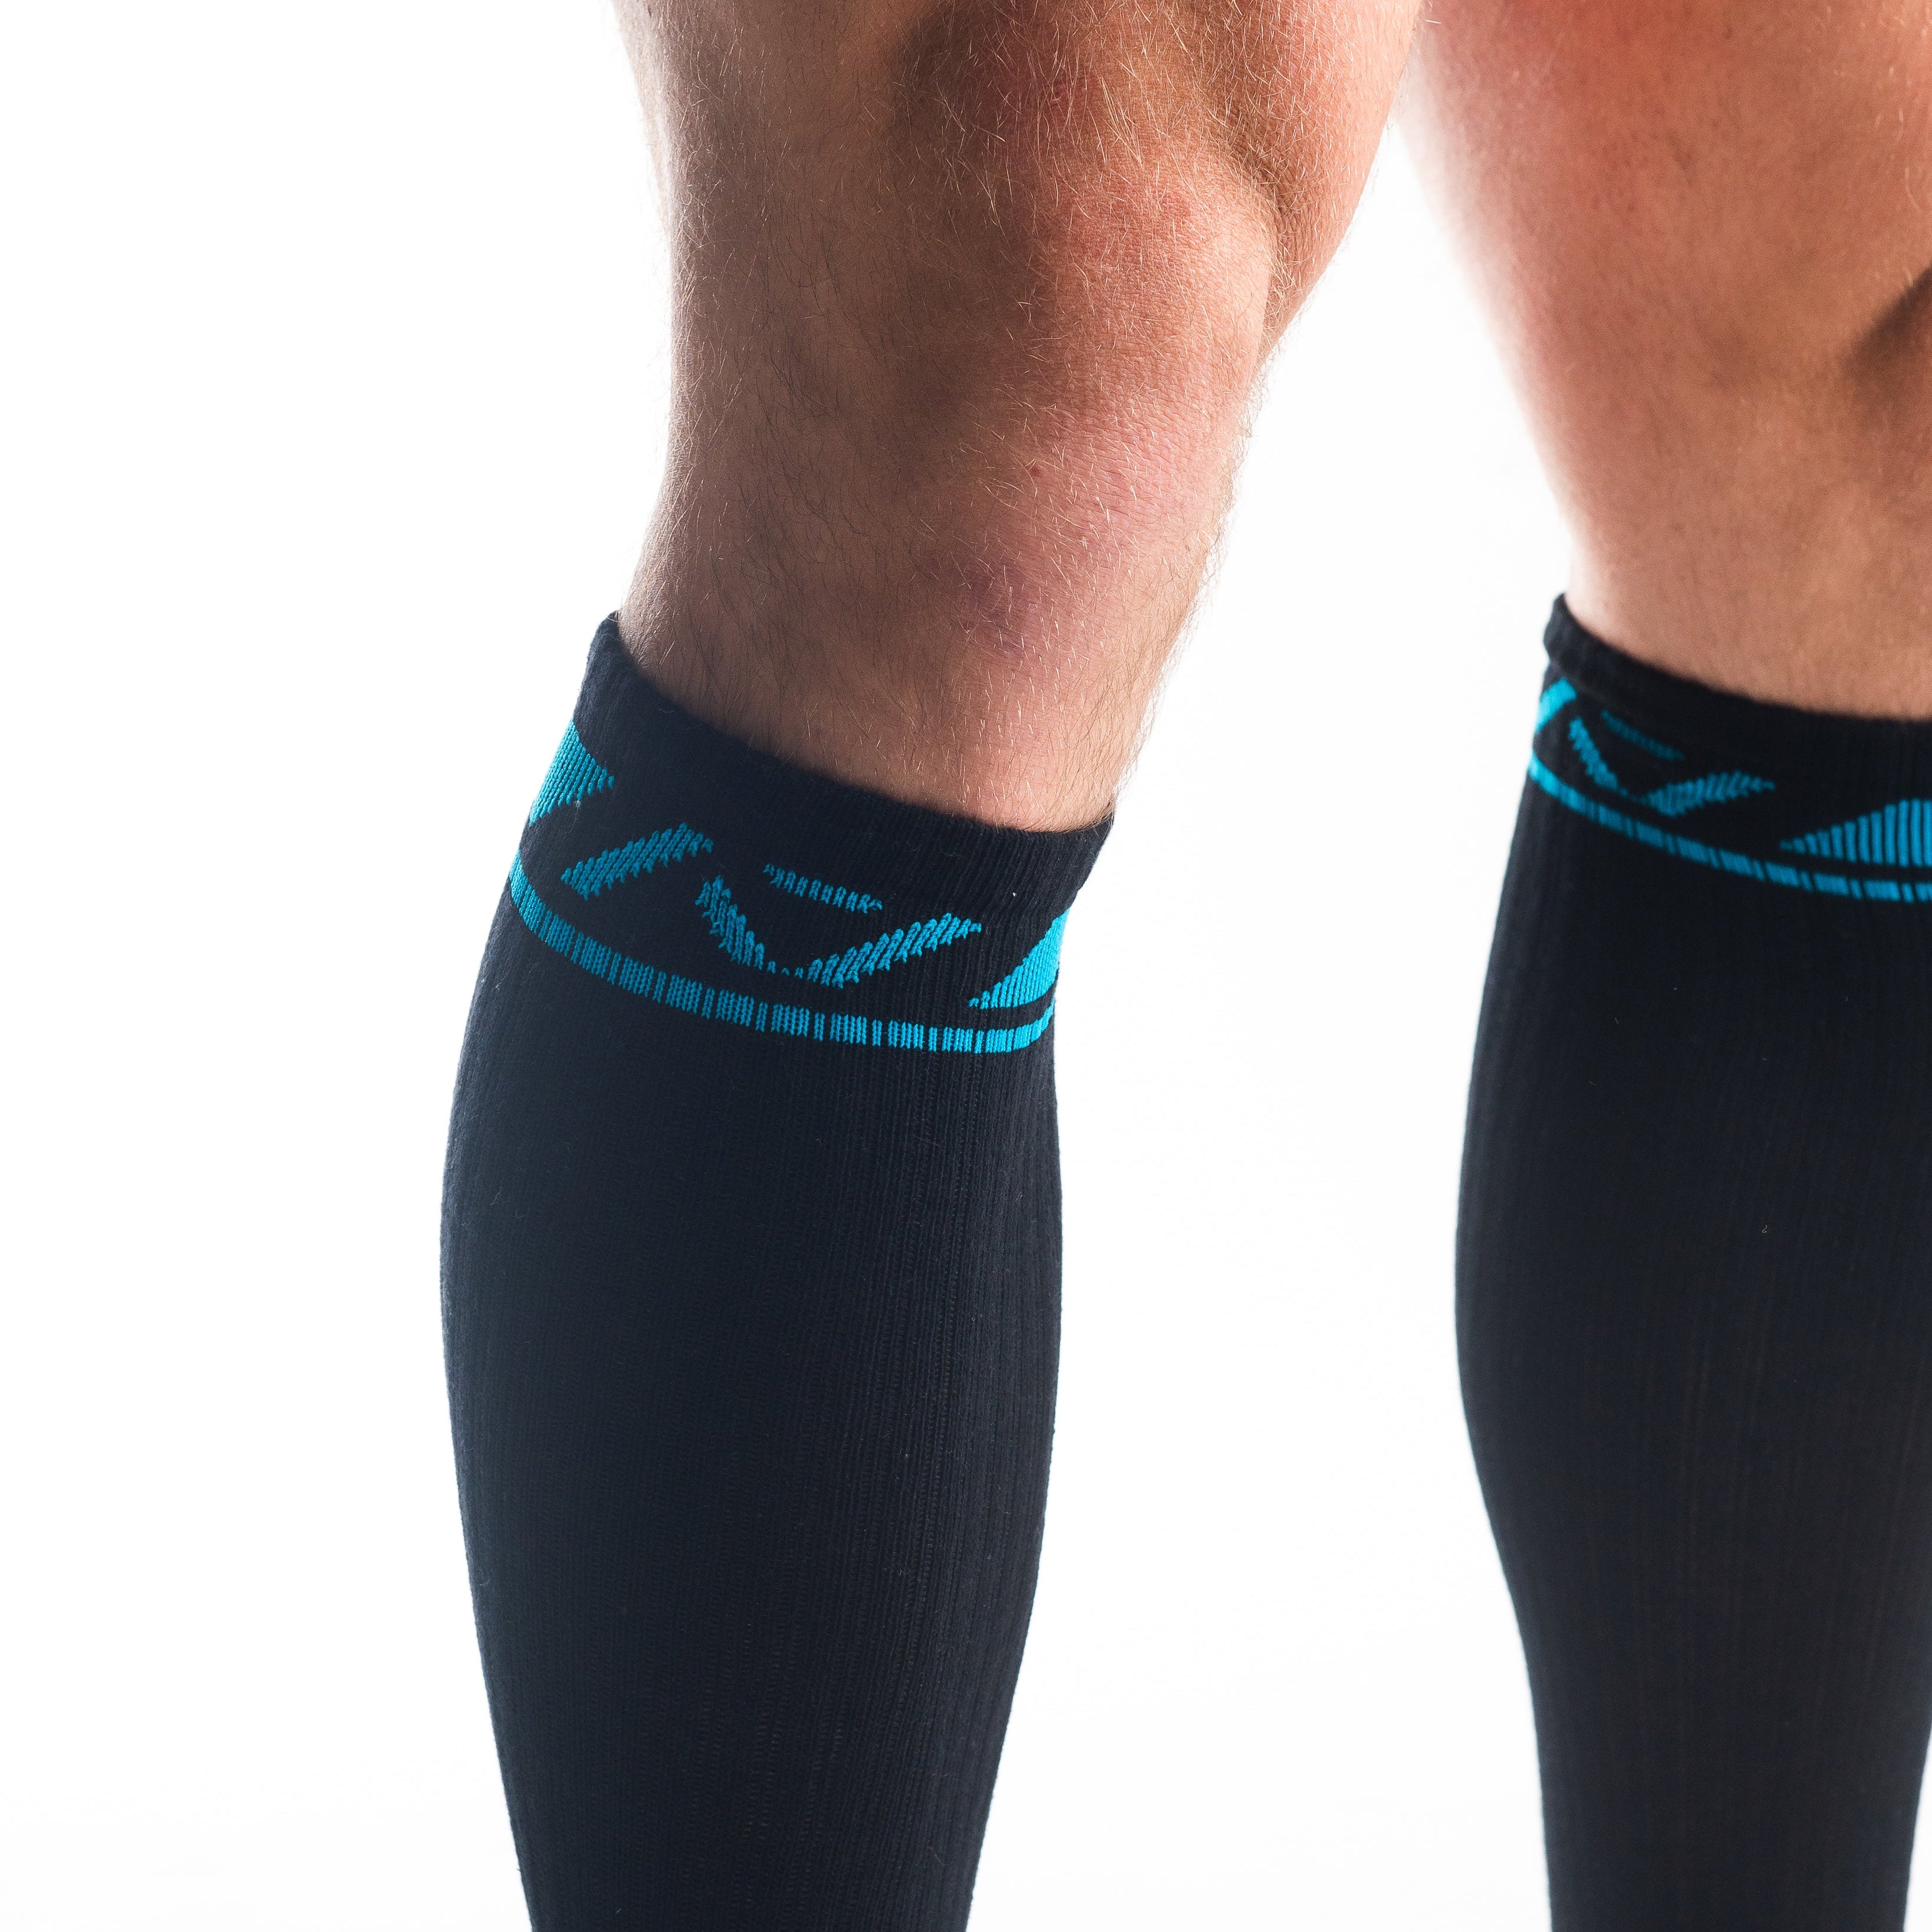 A7 Azul Deadlift socks are designed specifically for pulls and keep your shins protected from scrapes. A7 deadlift socks are a perfect pair to wear in training or powerlifting competition. The IPF Approved Kit includes Powerlifting Singlet, A7 Meet Shirt, A7 Zebra Wrist Wraps, A7 Deadlift Socks, Hourglass Knee Sleeves (Stiff Knee Sleeves and Rigor Mortis Knee Sleeves). All A7 Powerlifting Equipment shipping to UK, Norway, Switzerland and Iceland.